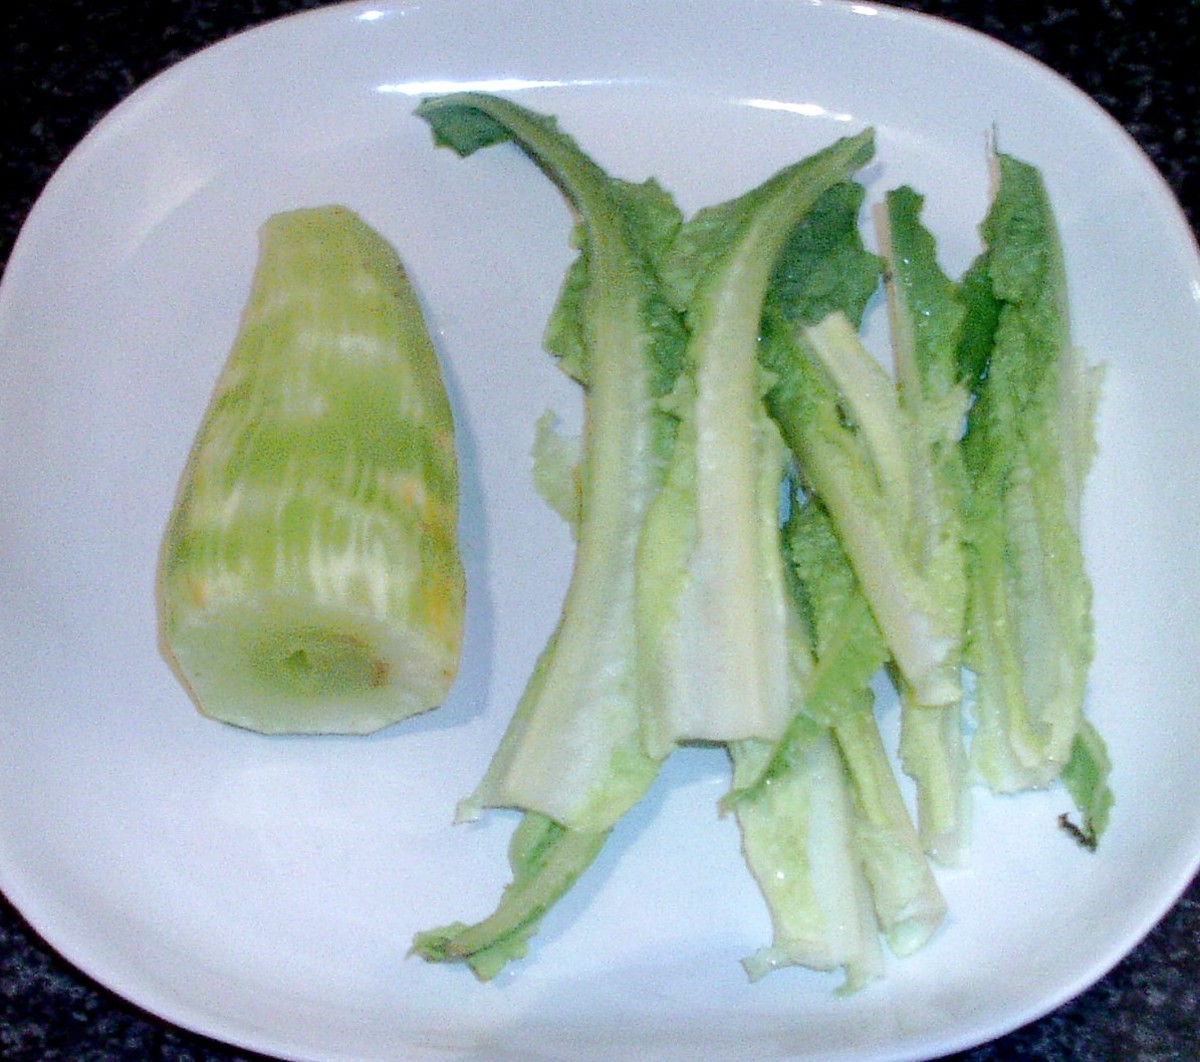 Peeled and cleaned celtuce stem and leaves